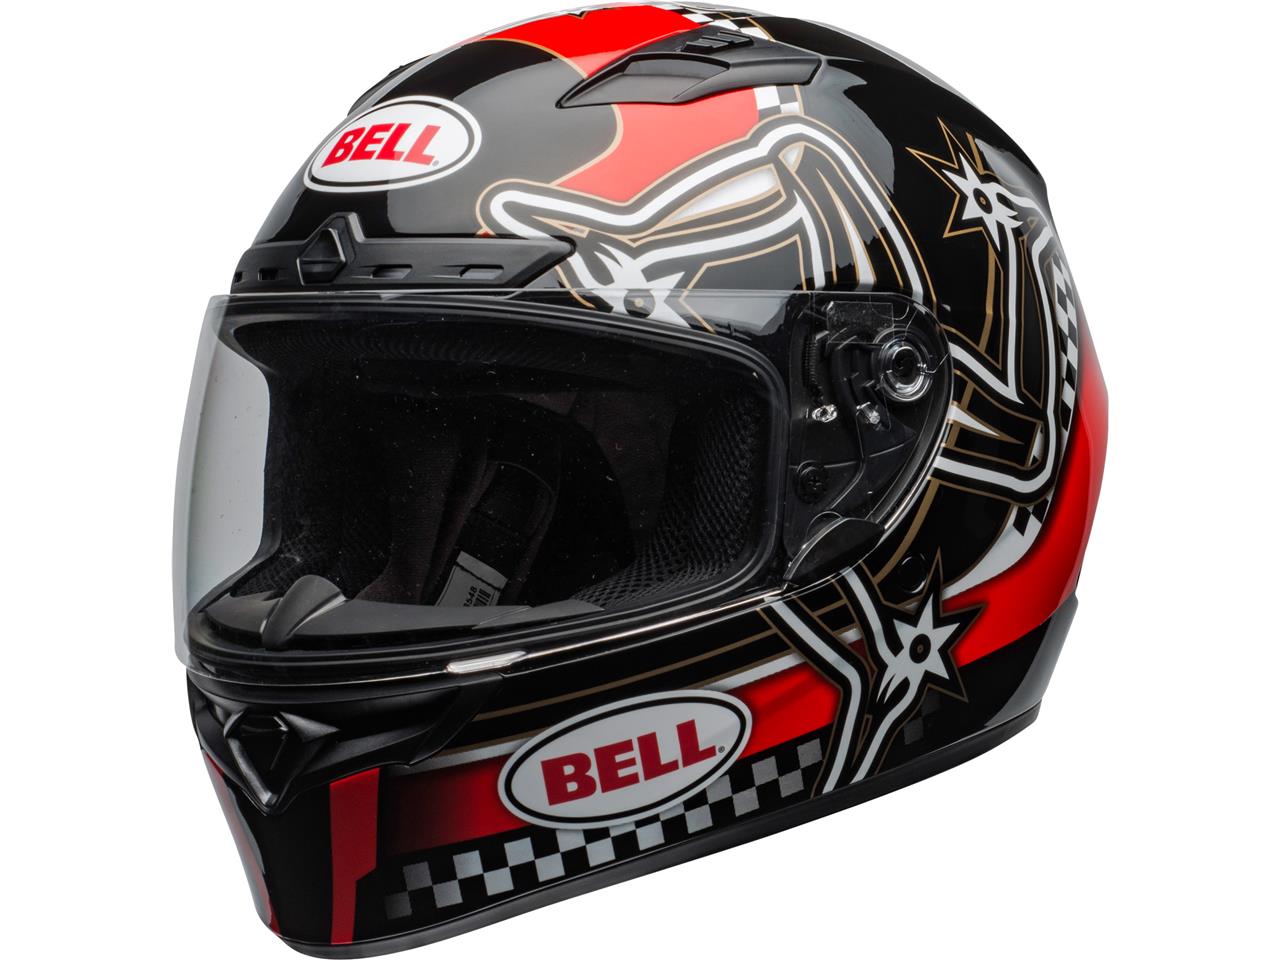 Casque intégral BELL Qualifier DLX Mips Isle of Man 2020 Gloss rouge/noir XS